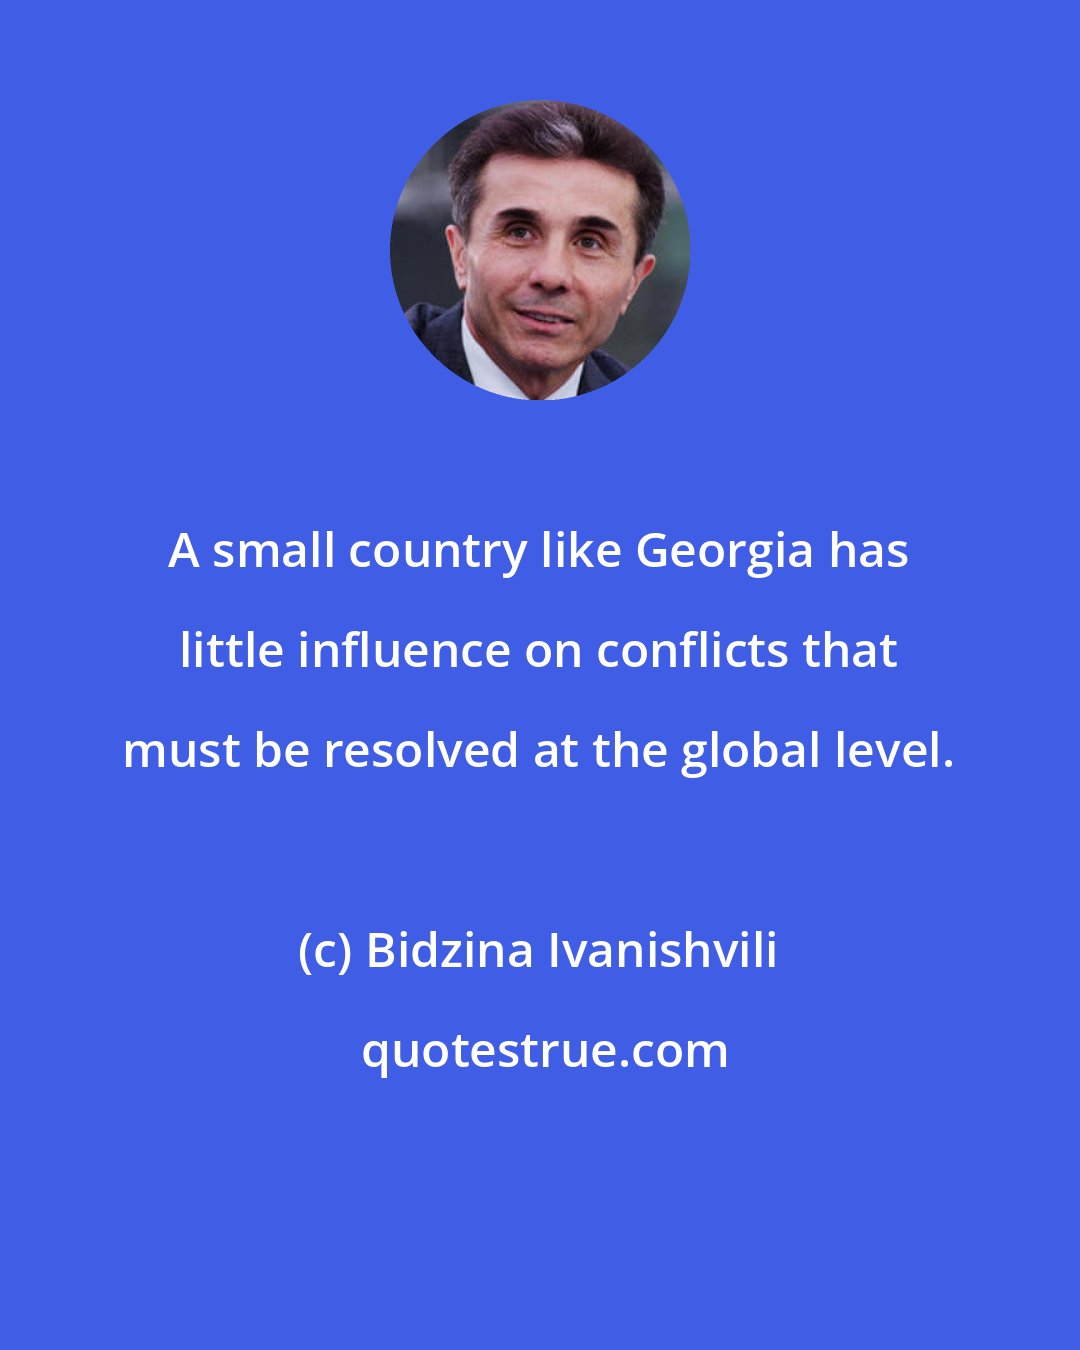 Bidzina Ivanishvili: A small country like Georgia has little influence on conflicts that must be resolved at the global level.